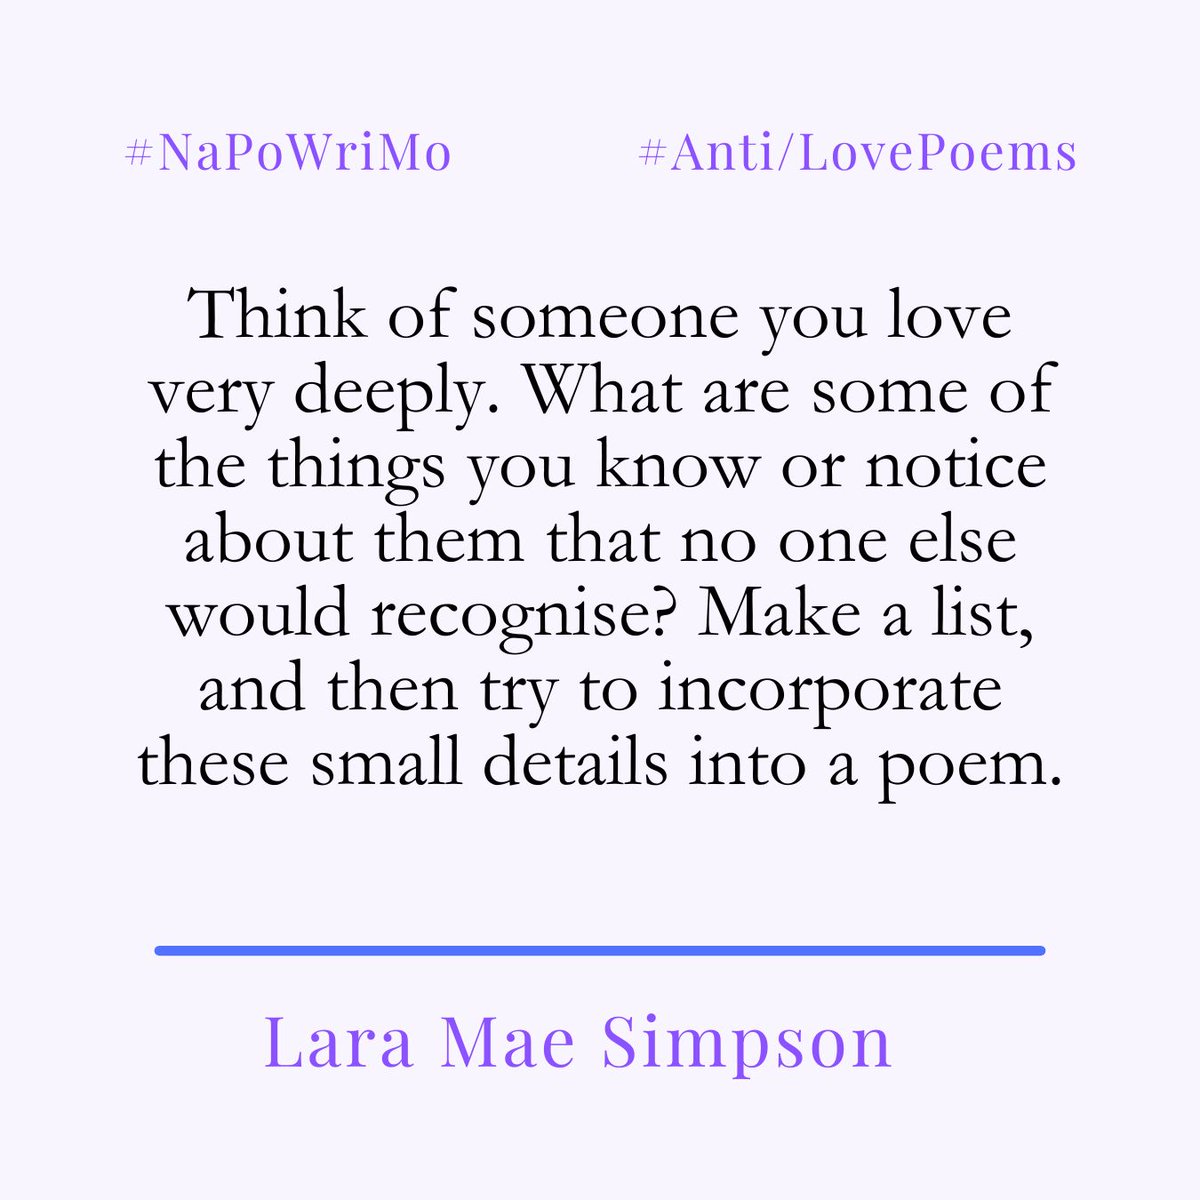 Happy #NaPoWriMo!

The challenge to write a poem every day of April has begun and to help you on your way The Poetry Society will be providing a prompt each day - today's is from Lara Mae Simpson!

Check back here for more